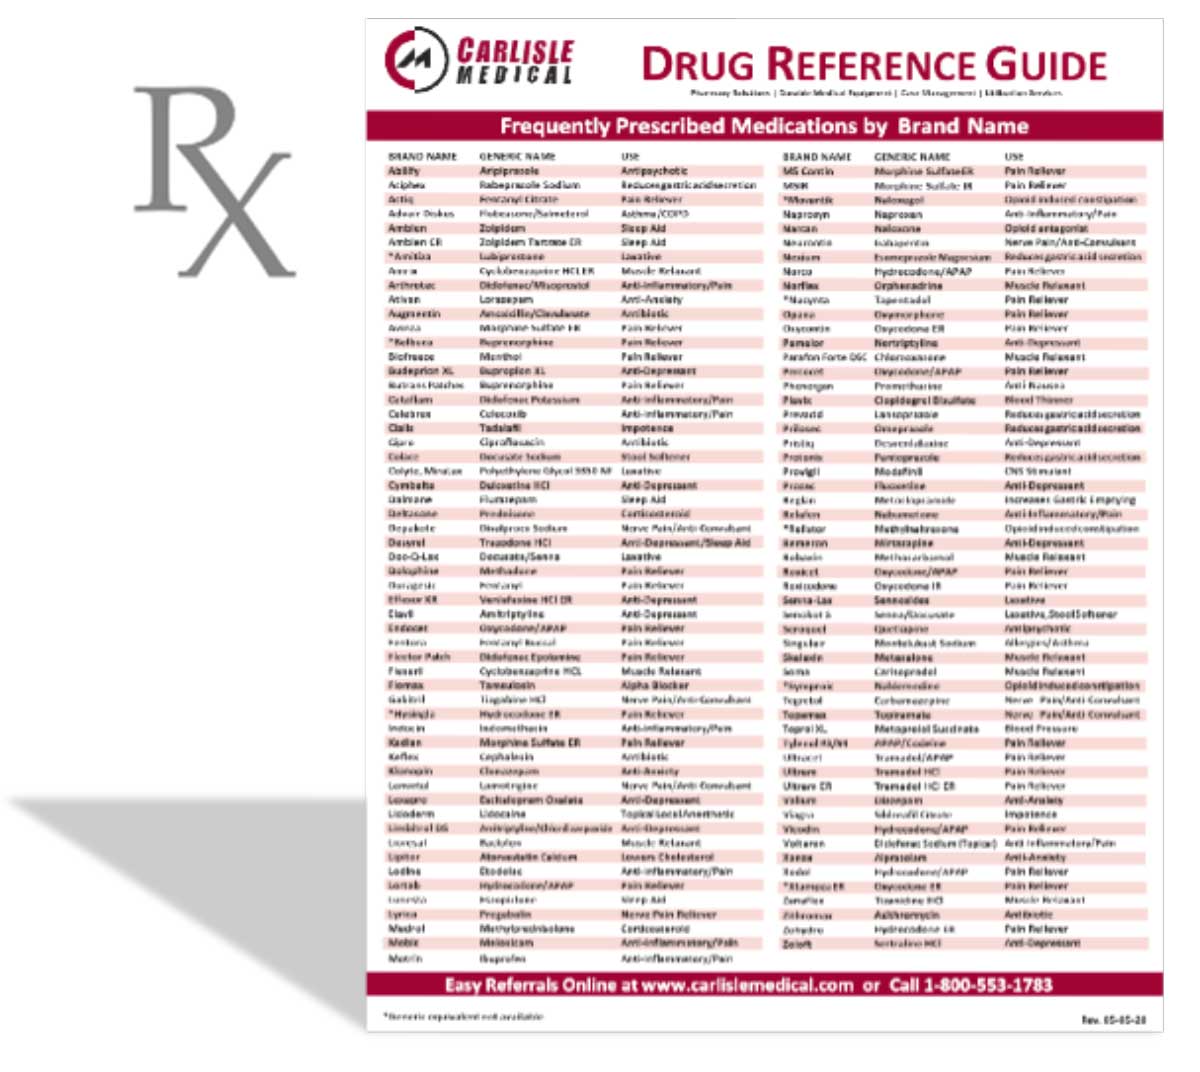 May 2020 Update to the Drug Reference Guide